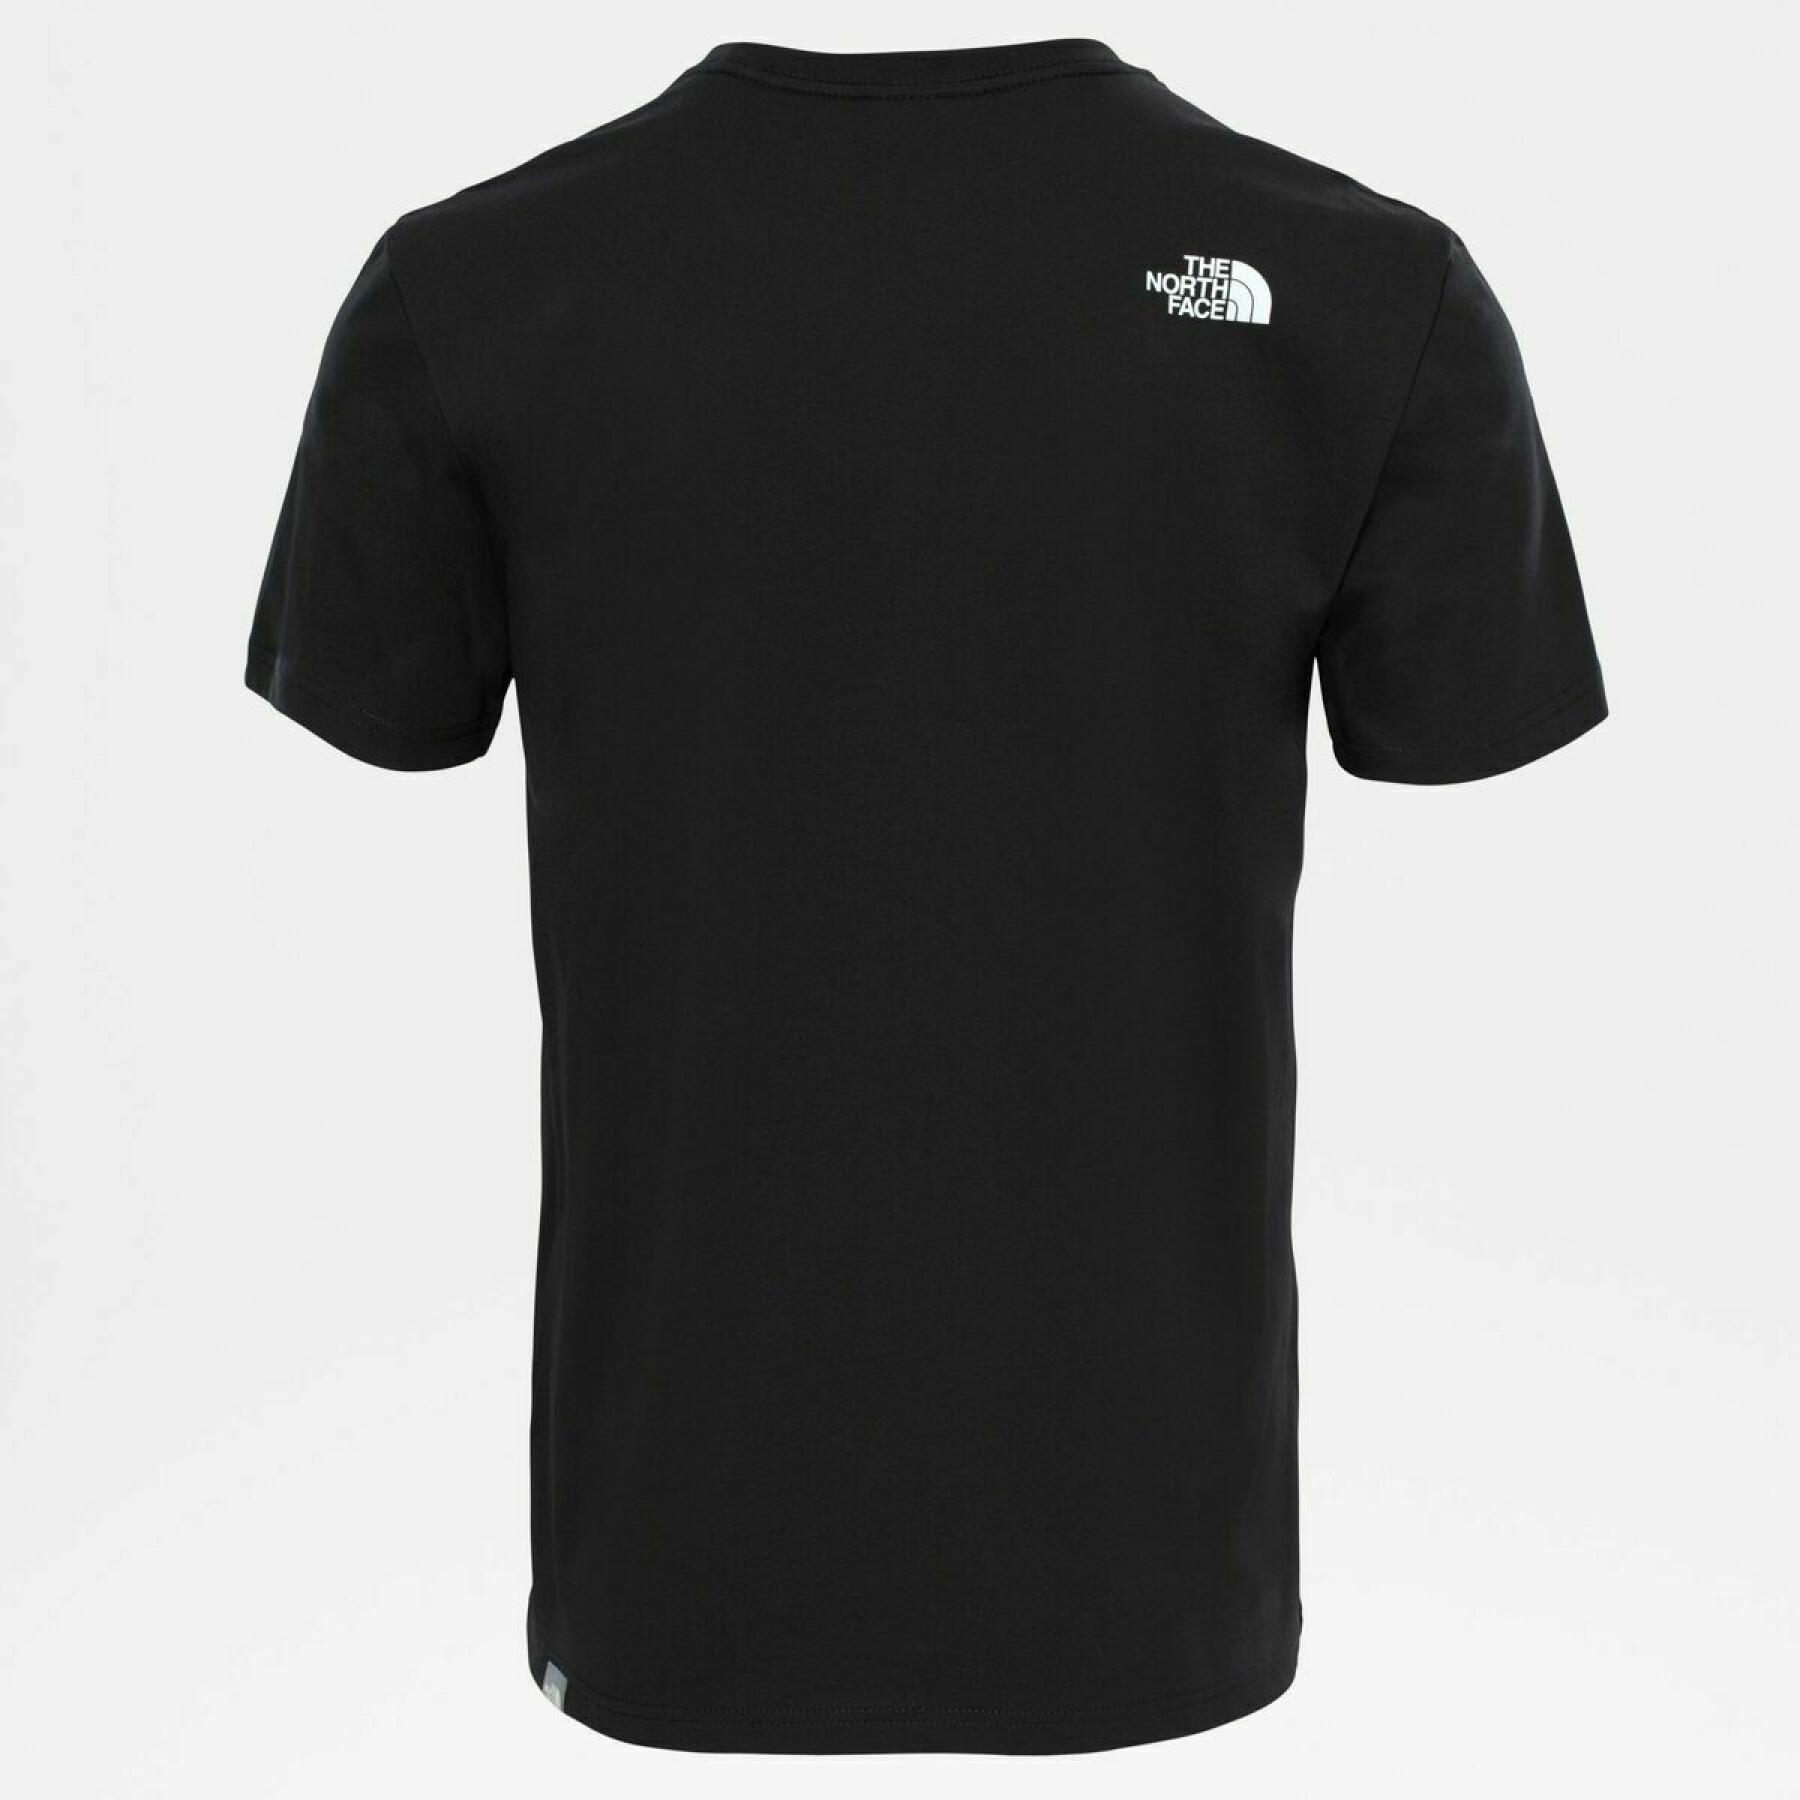 T-shirt clássico The North Face "Never Stop Exploring"